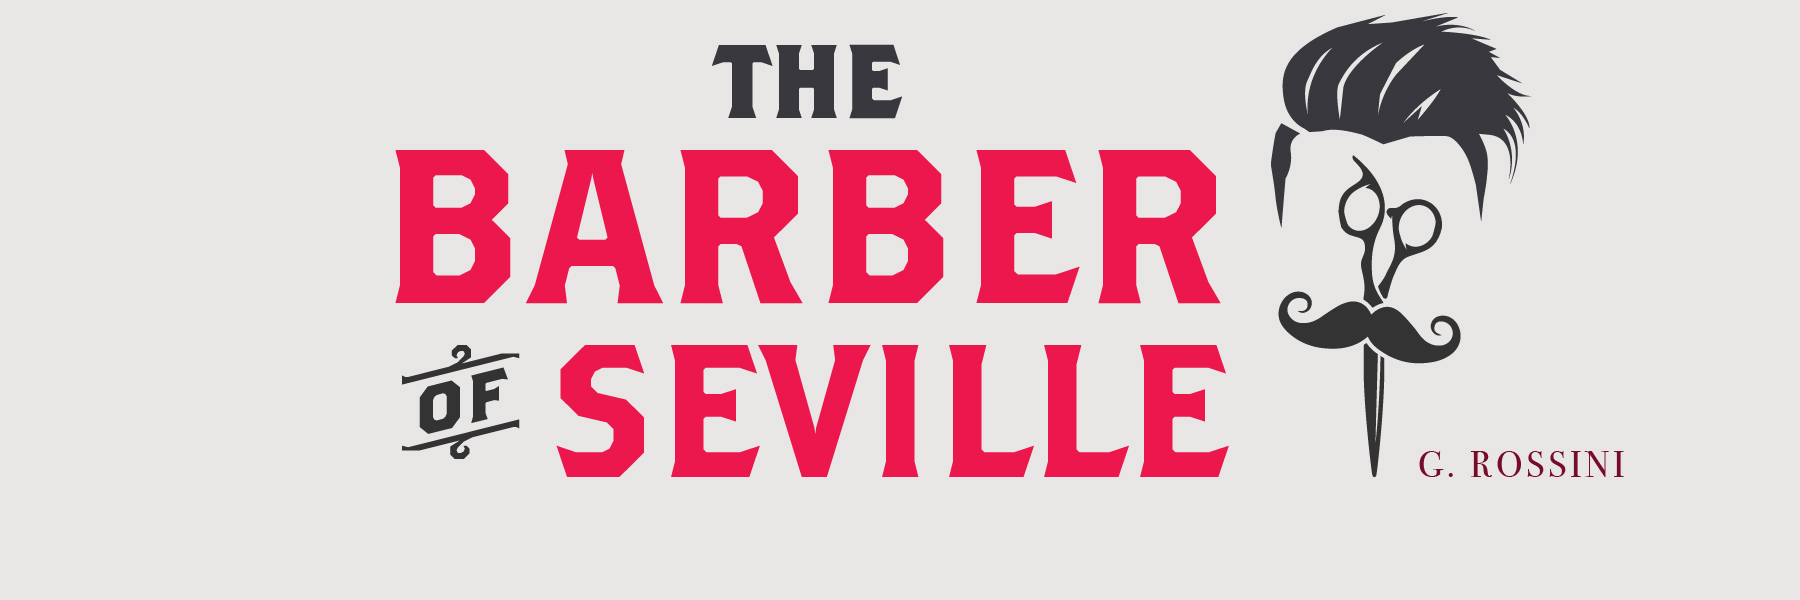 Title Art for The Barber of Seville, written by G. Rossini. Image of Barber face created with scissors representing the eyes, nose, and mouth.